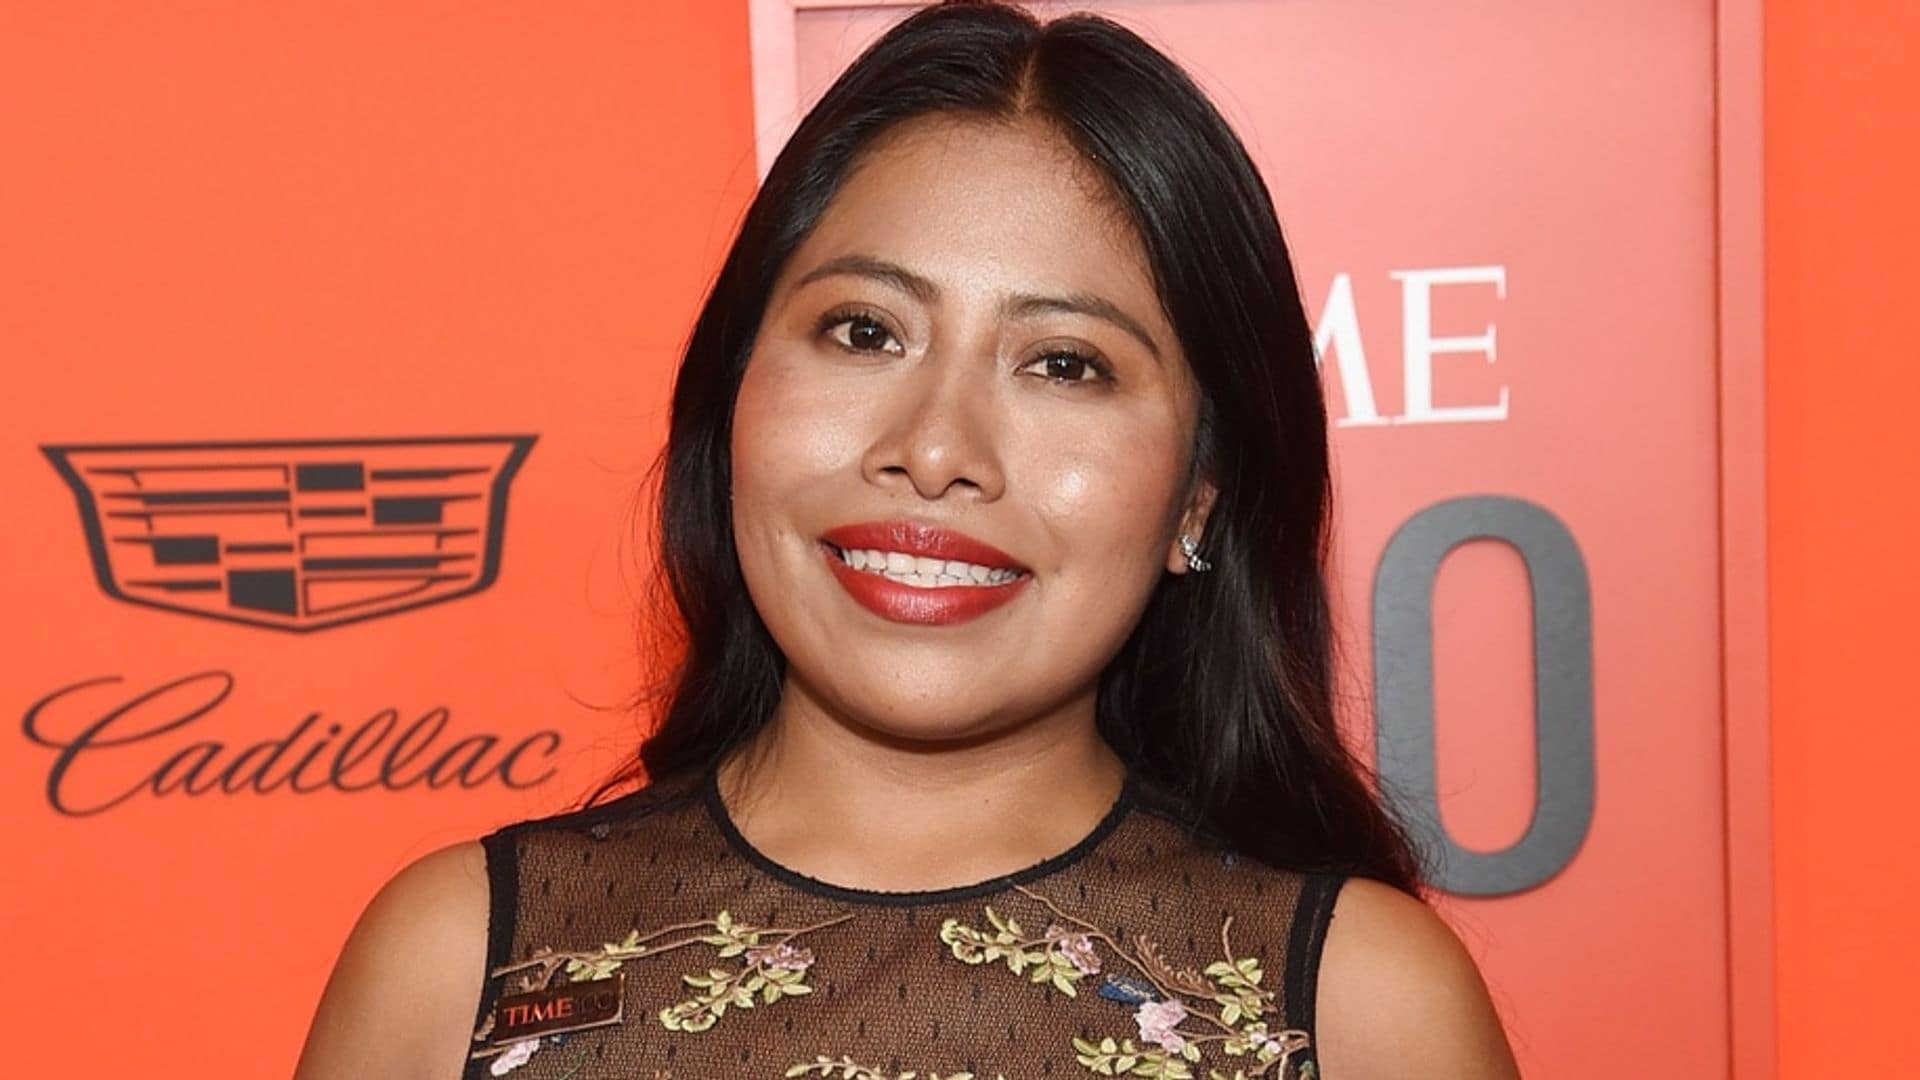 Yalitza Aparicio reveals her future plans and shares fashion tips from her stylist